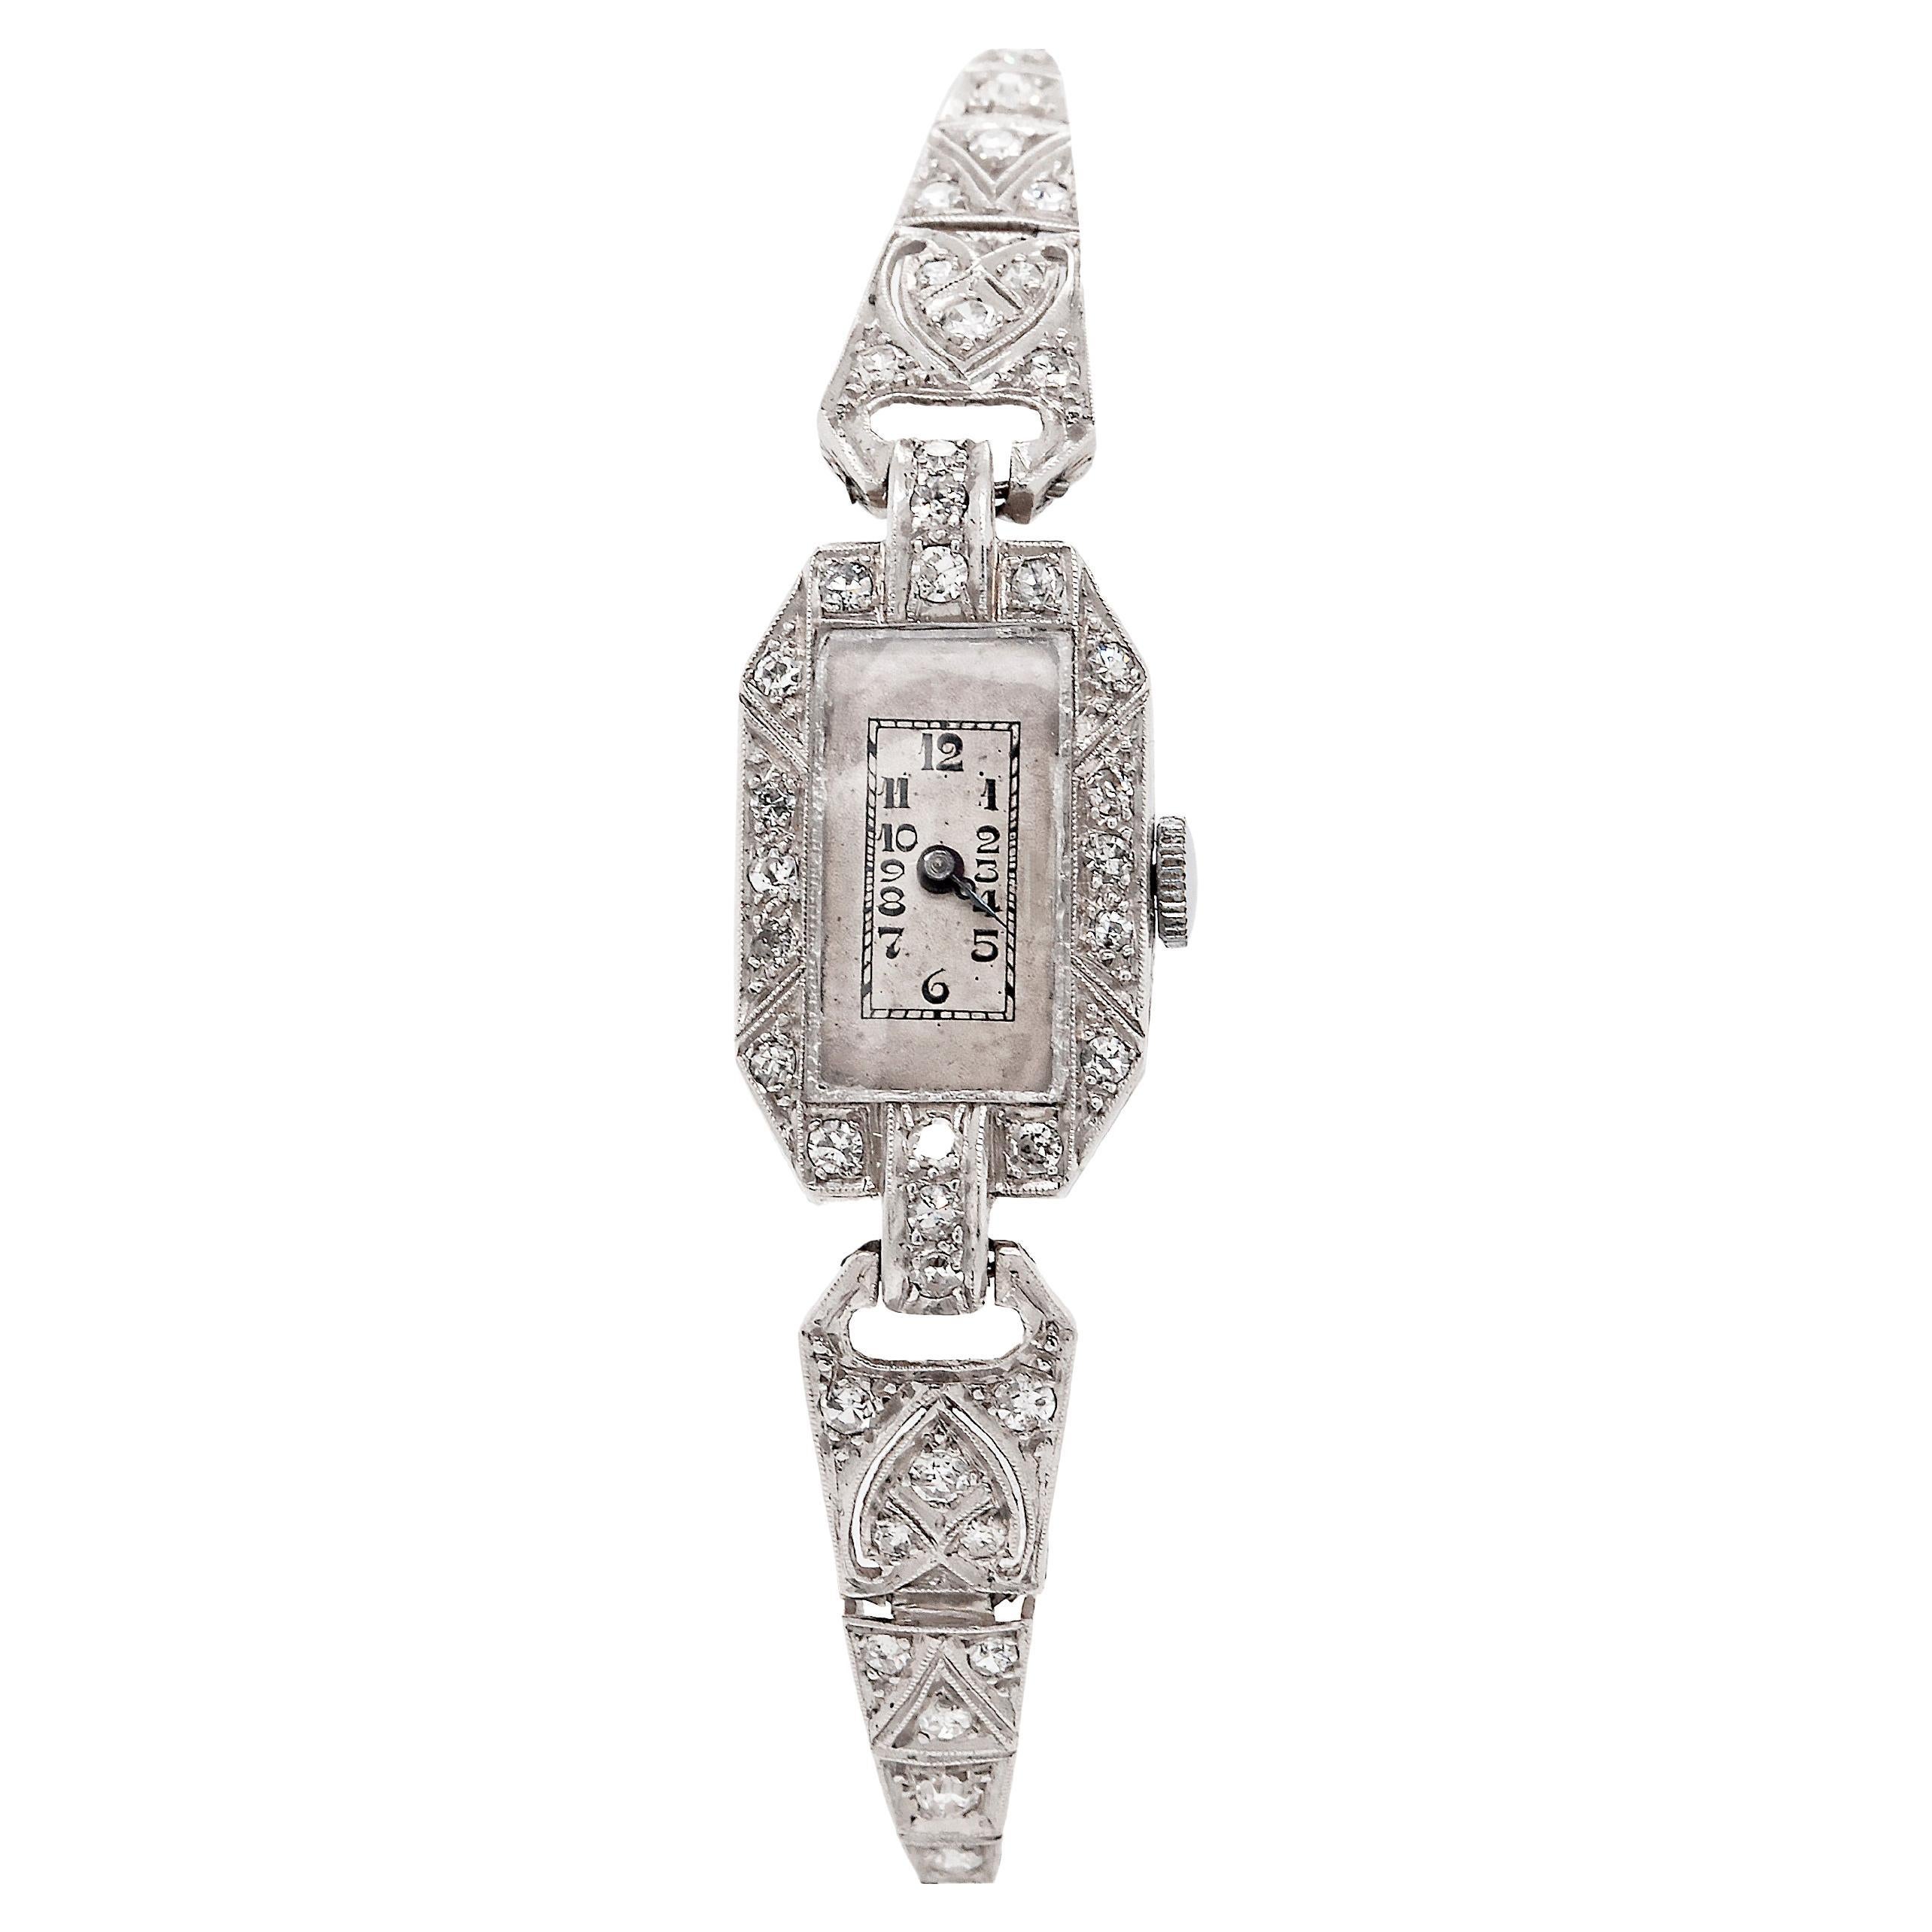 Boasting an impressive and dazzling diamond studded design, expertly crafted in precious platinum, this exquisite Art Deco ladies watch is the perfect timeless accessory for any special occasion.

Taking centre stage is a delicate 7 x 15mm